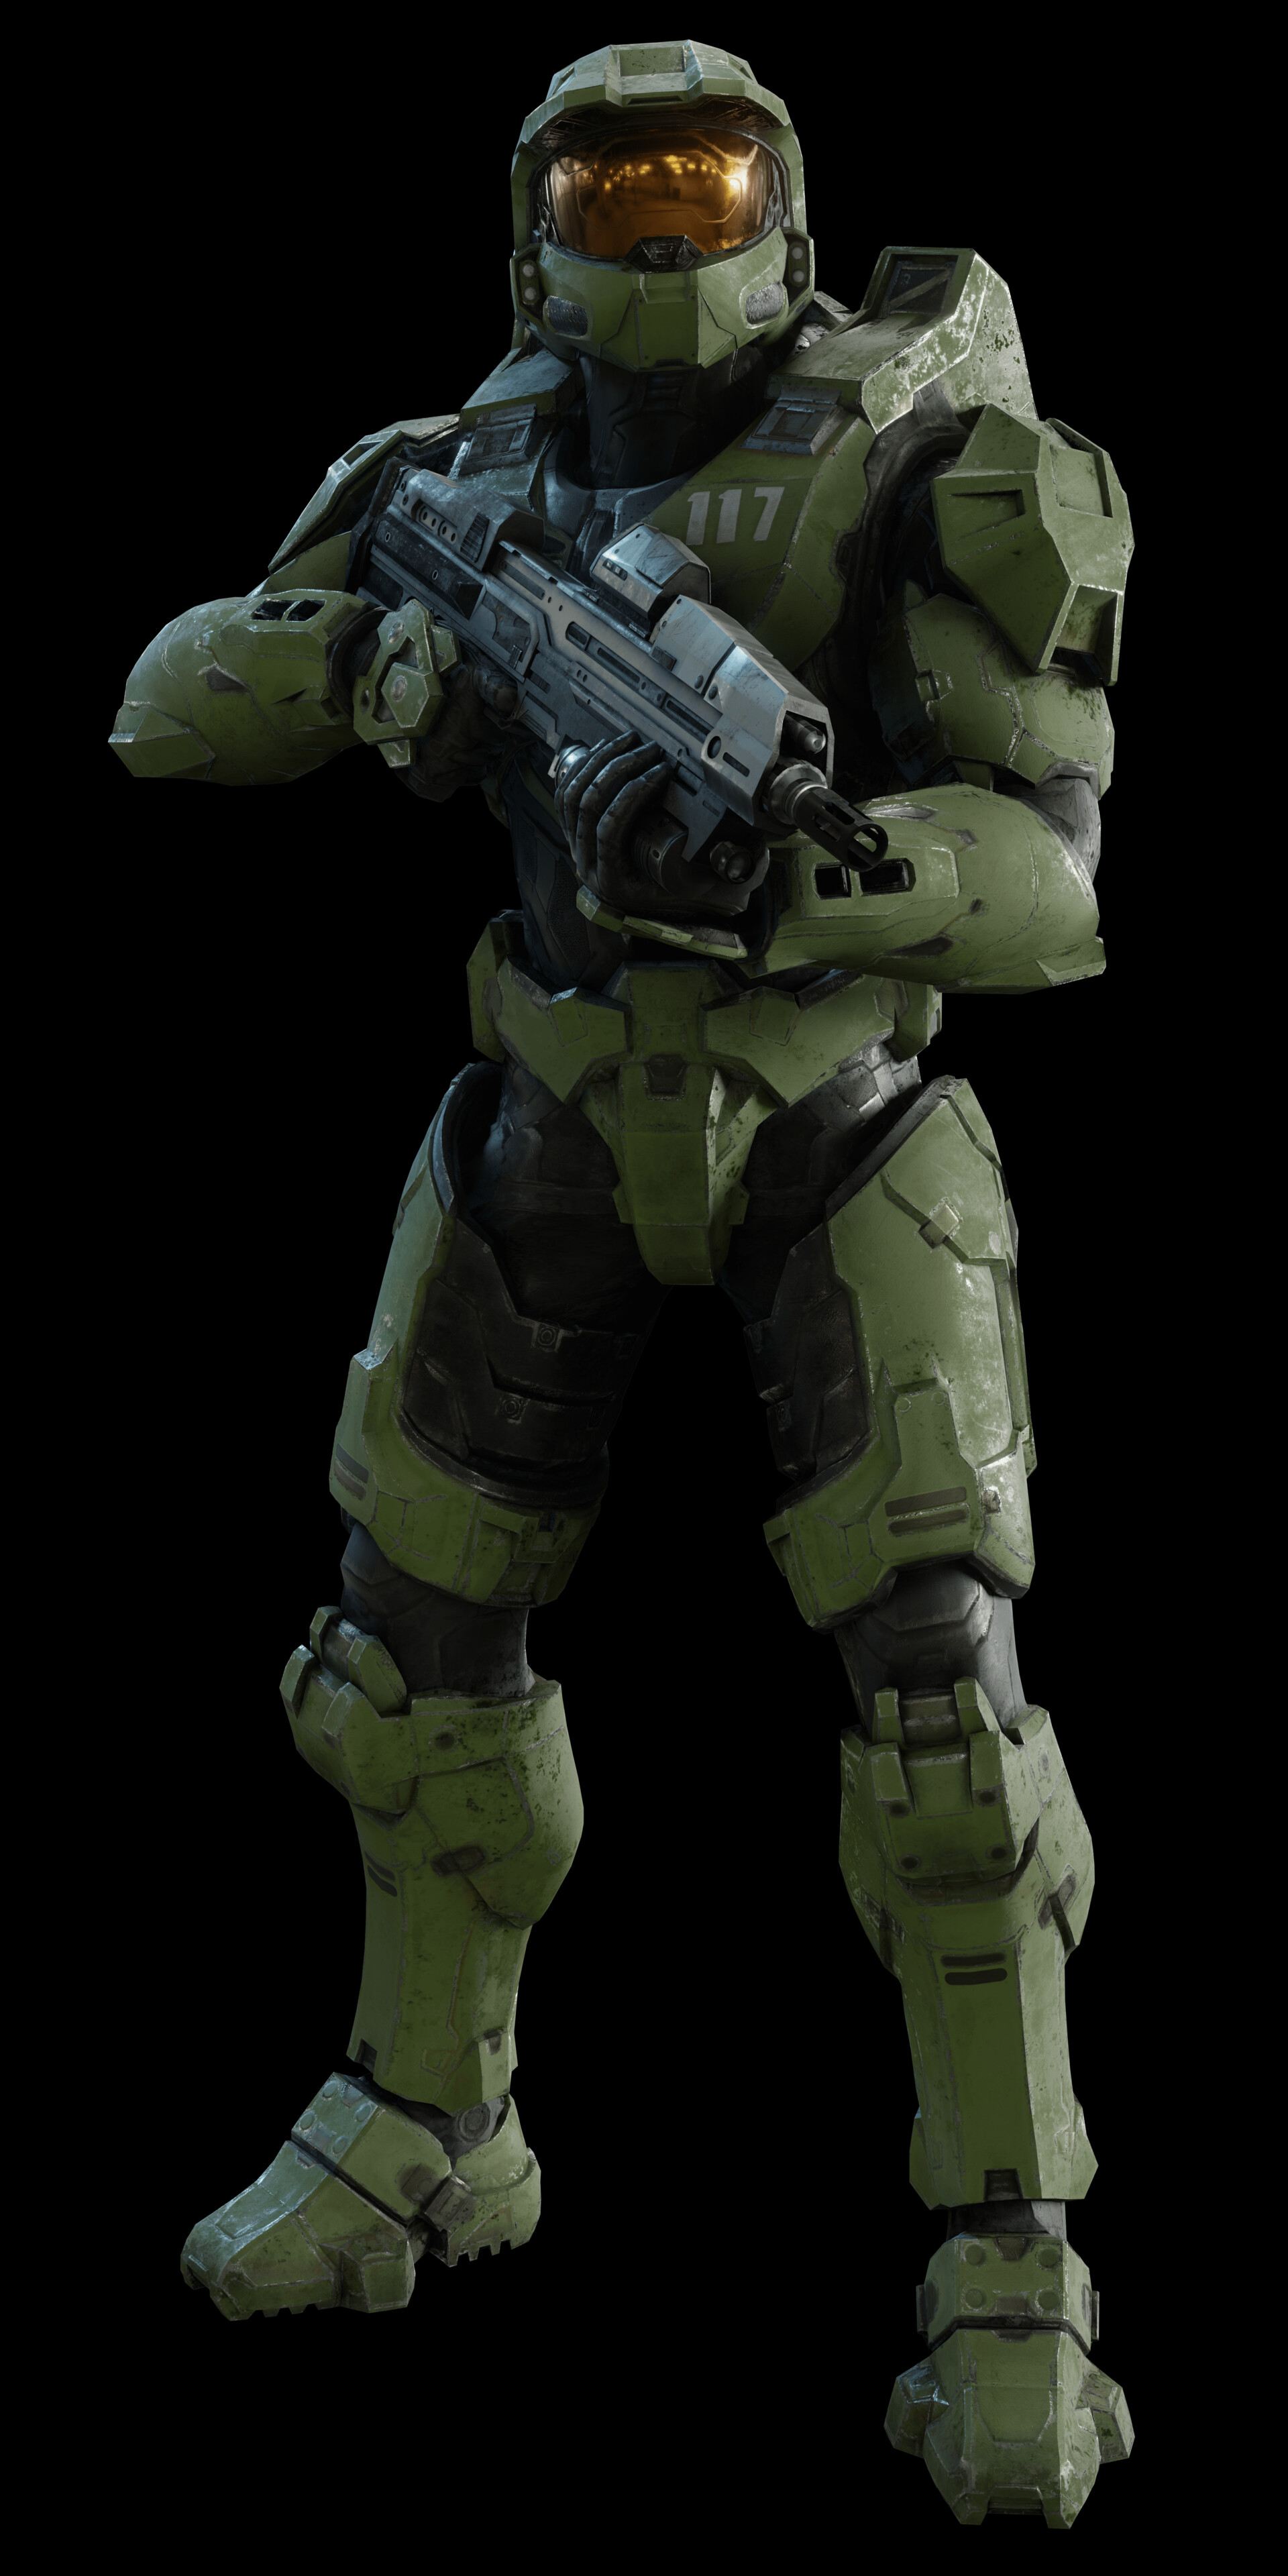 ArtStation - Halo: Infinite Master Chief Full Body Renders (Remake of a ...